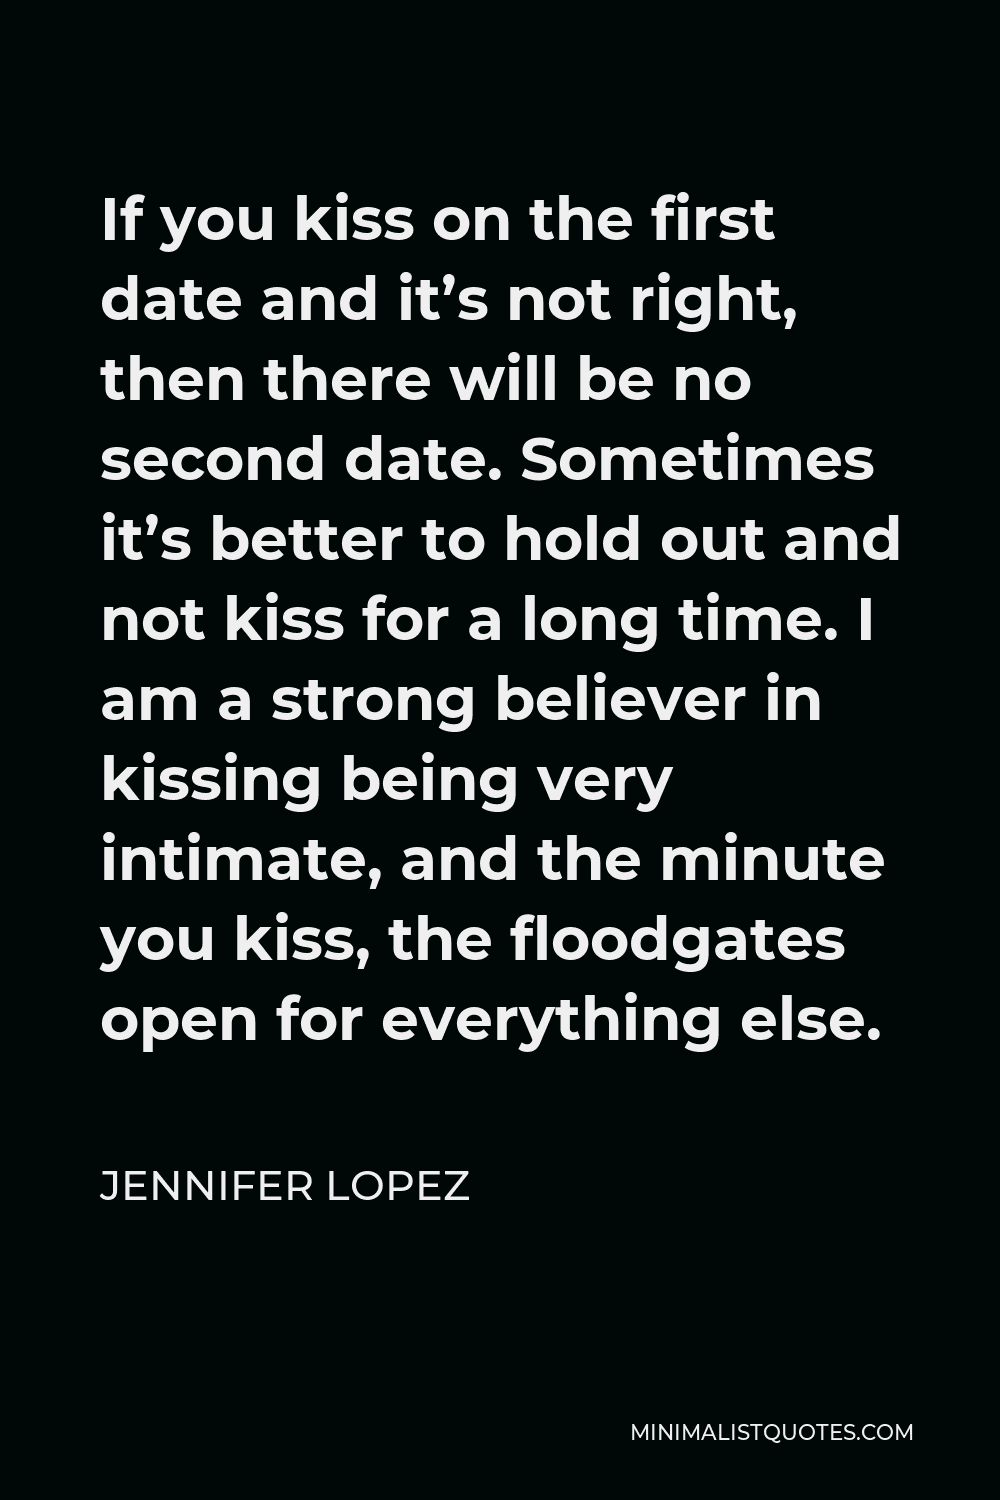 Jennifer Lopez Quote - If you kiss on the first date and it’s not right, then there will be no second date. Sometimes it’s better to hold out and not kiss for a long time. I am a strong believer in kissing being very intimate, and the minute you kiss, the floodgates open for everything else.